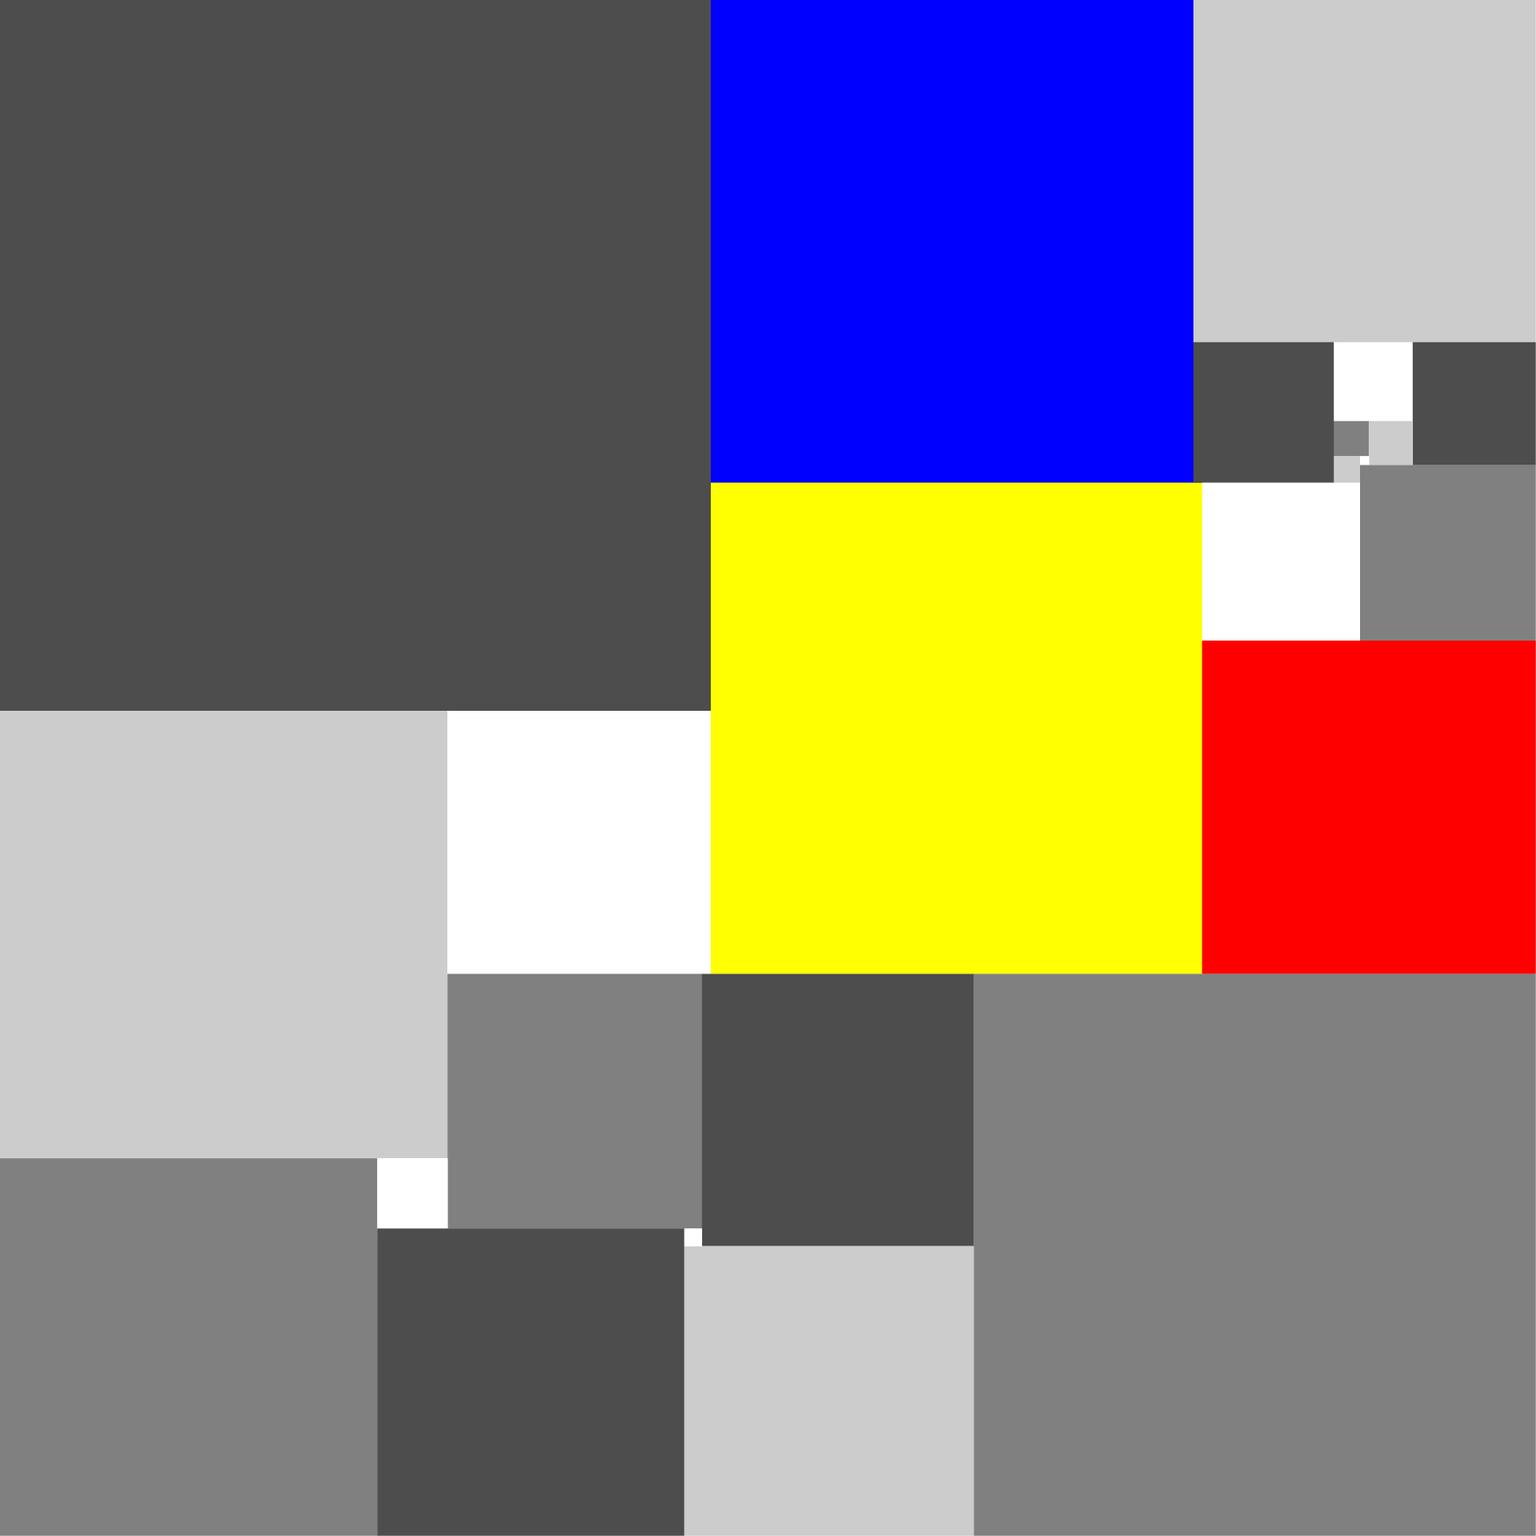 Image for entry 'CPSS order 24 – Yellow-Red-Blue Mondrian Style'